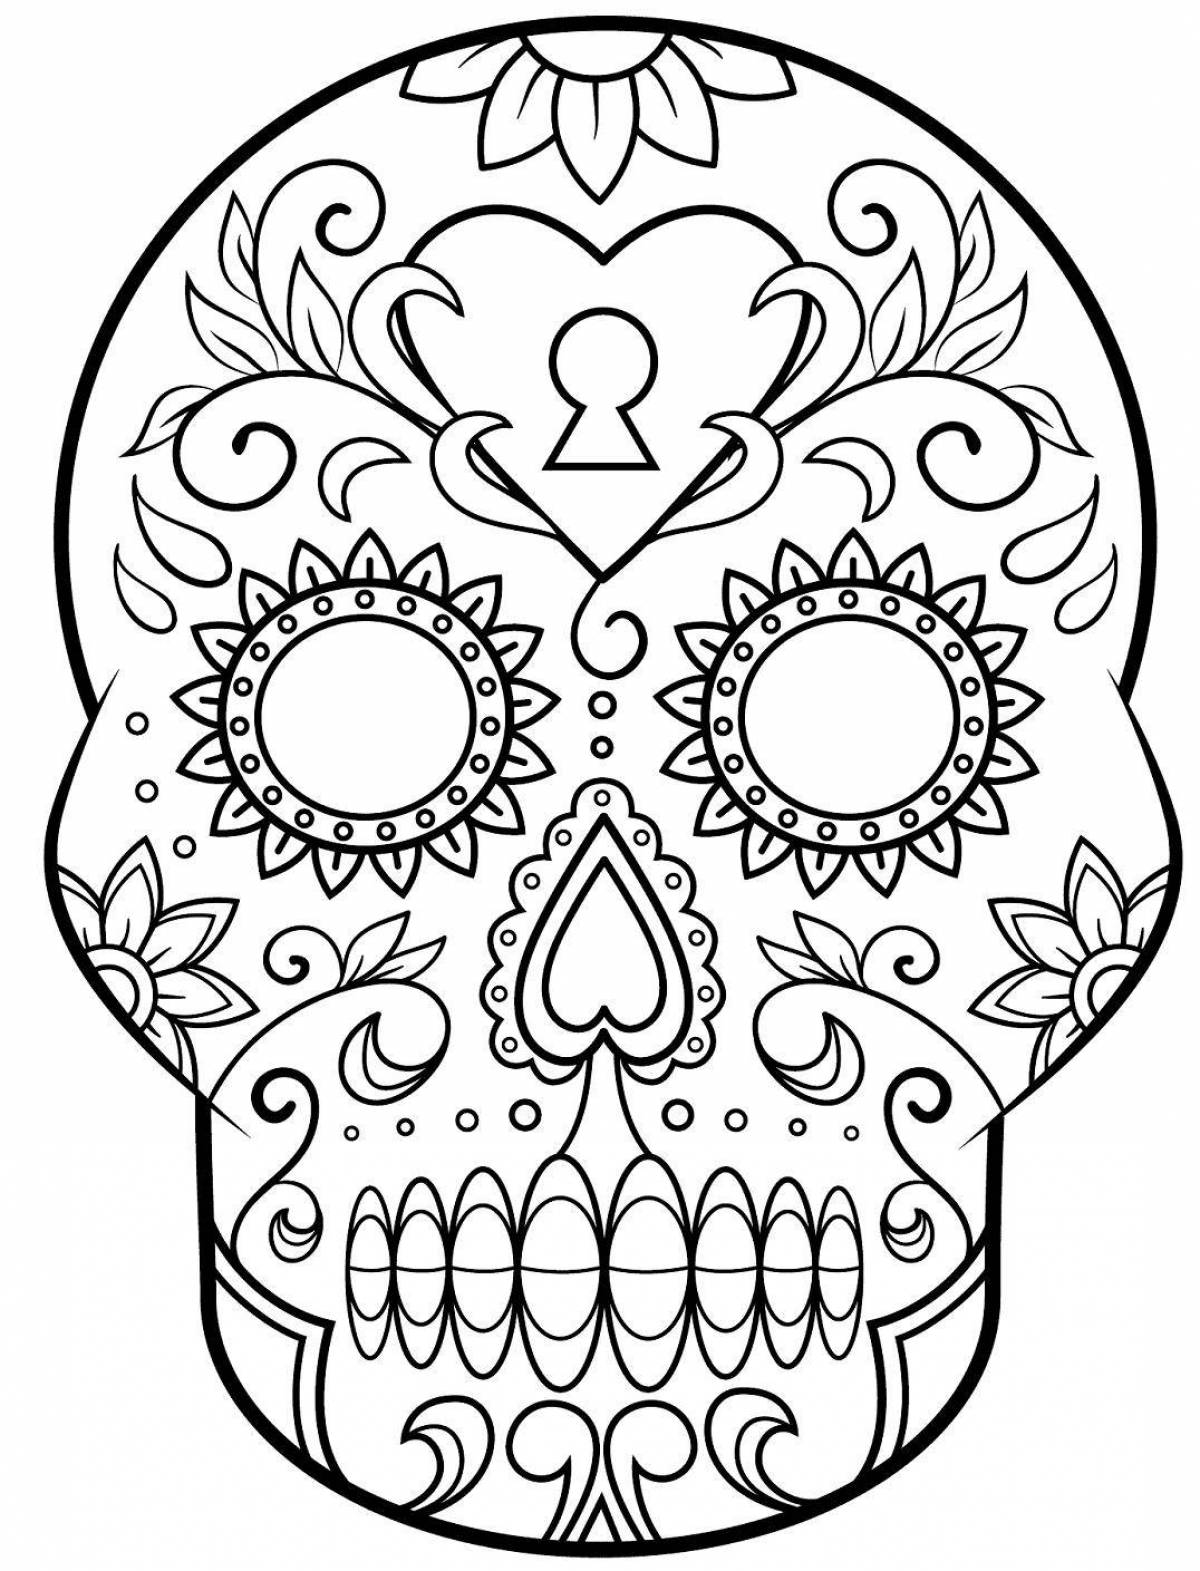 Spooky skull coloring book for kids